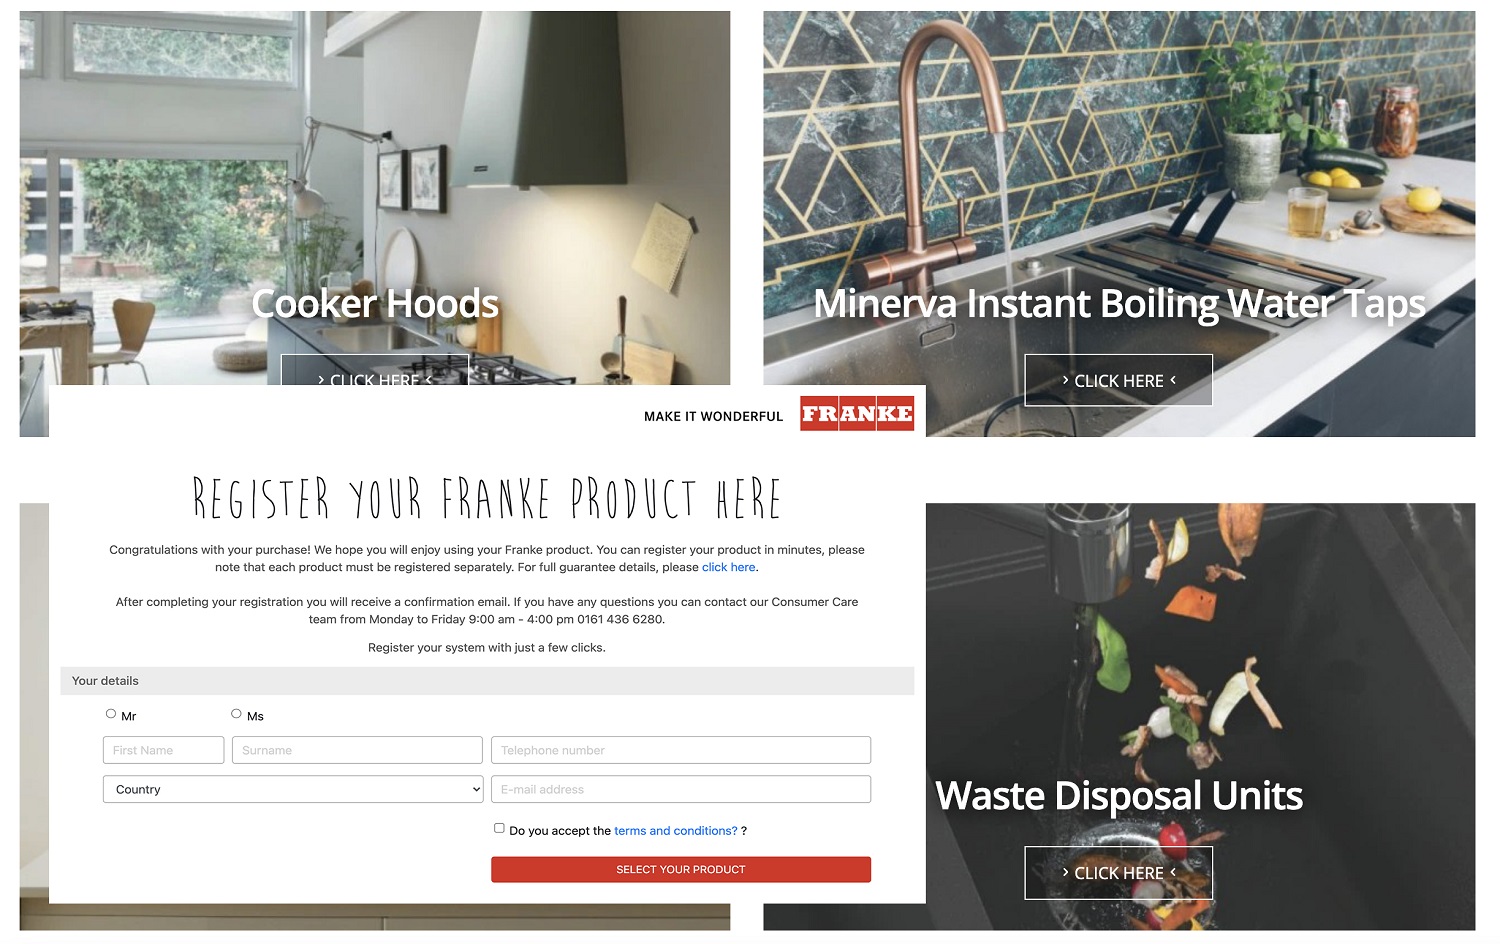 Franke updates website with product registration section